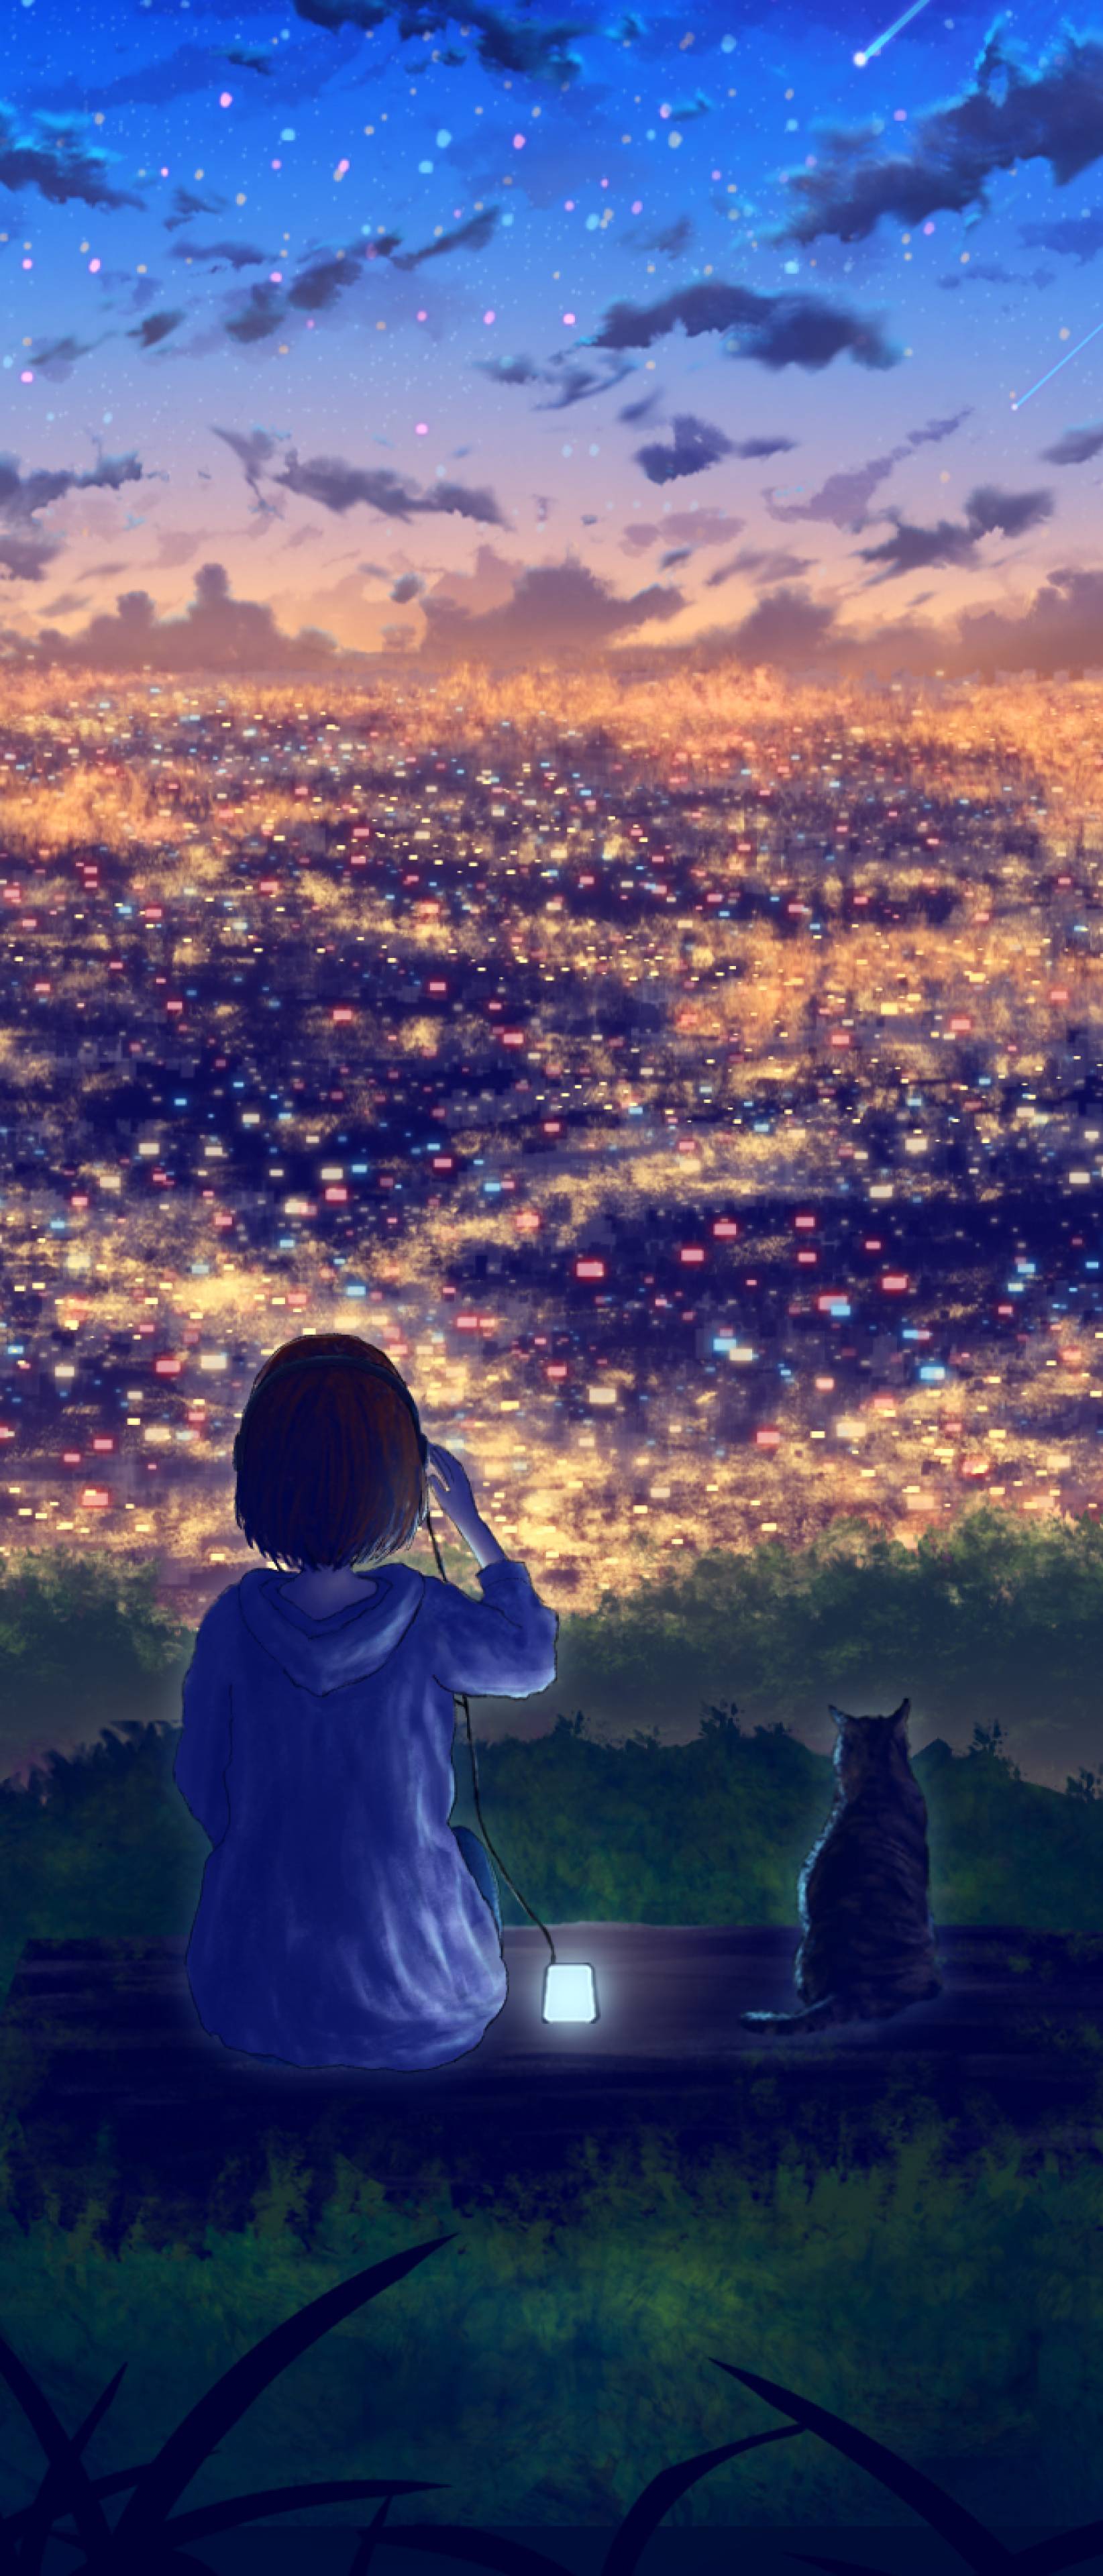 A girl and her cat watching the city lights - Anime city